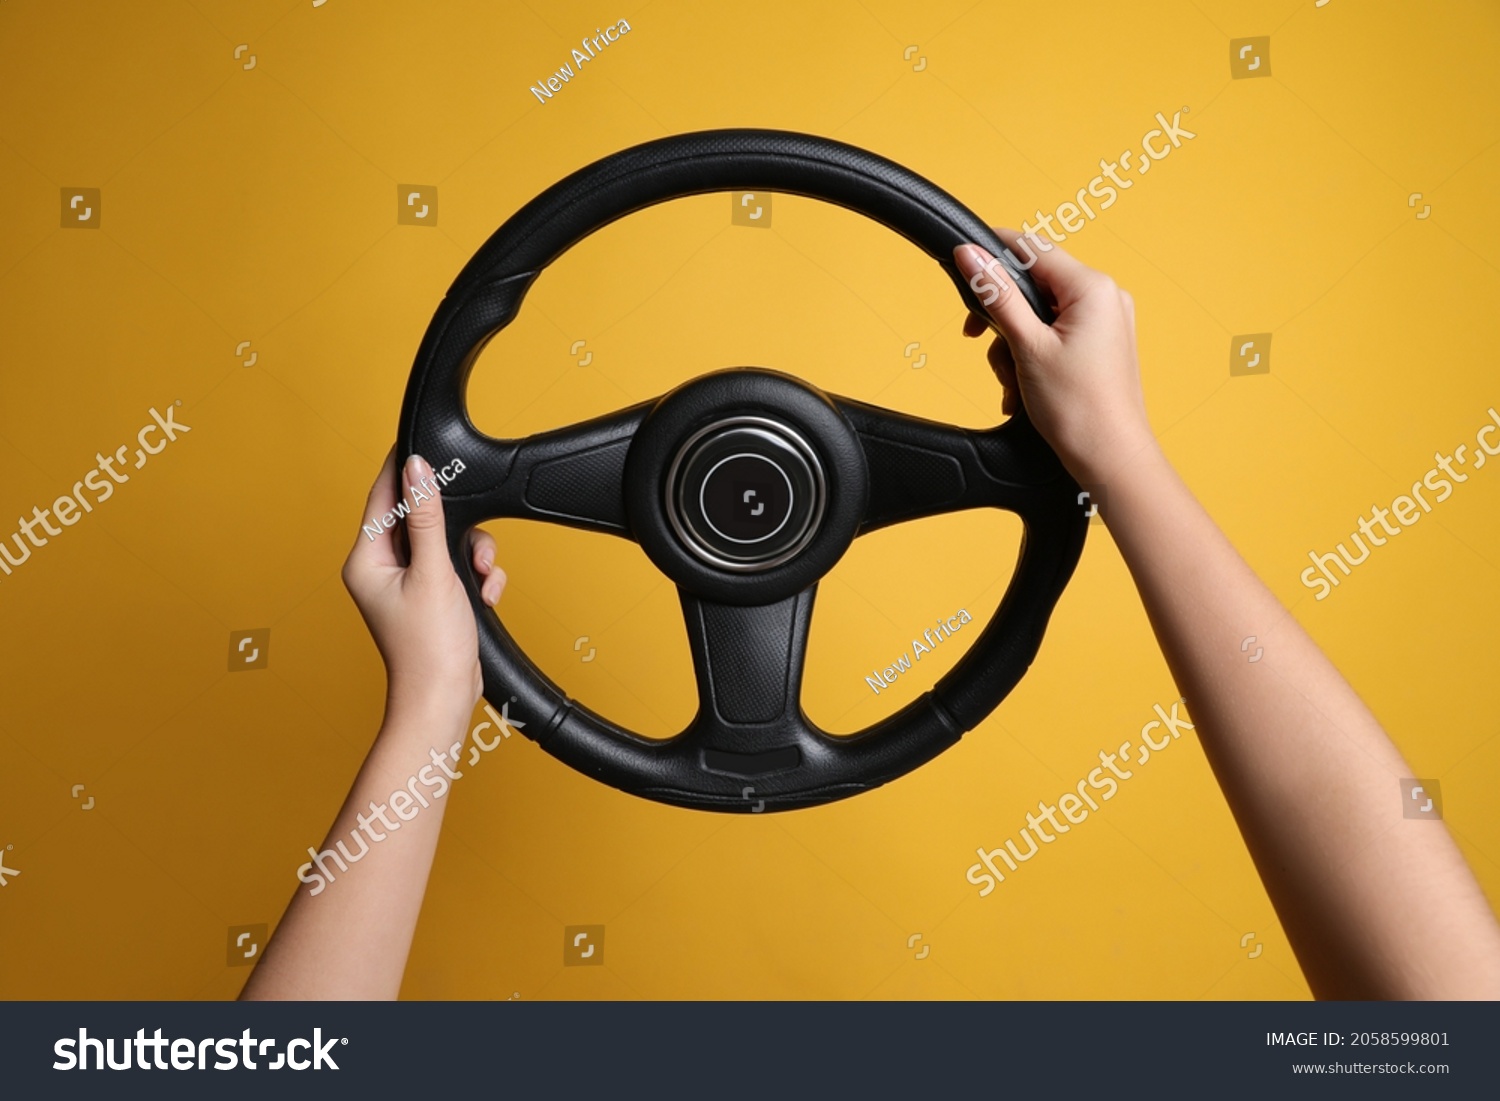 Woman holding steering wheel on yellow background, closeup #2058599801